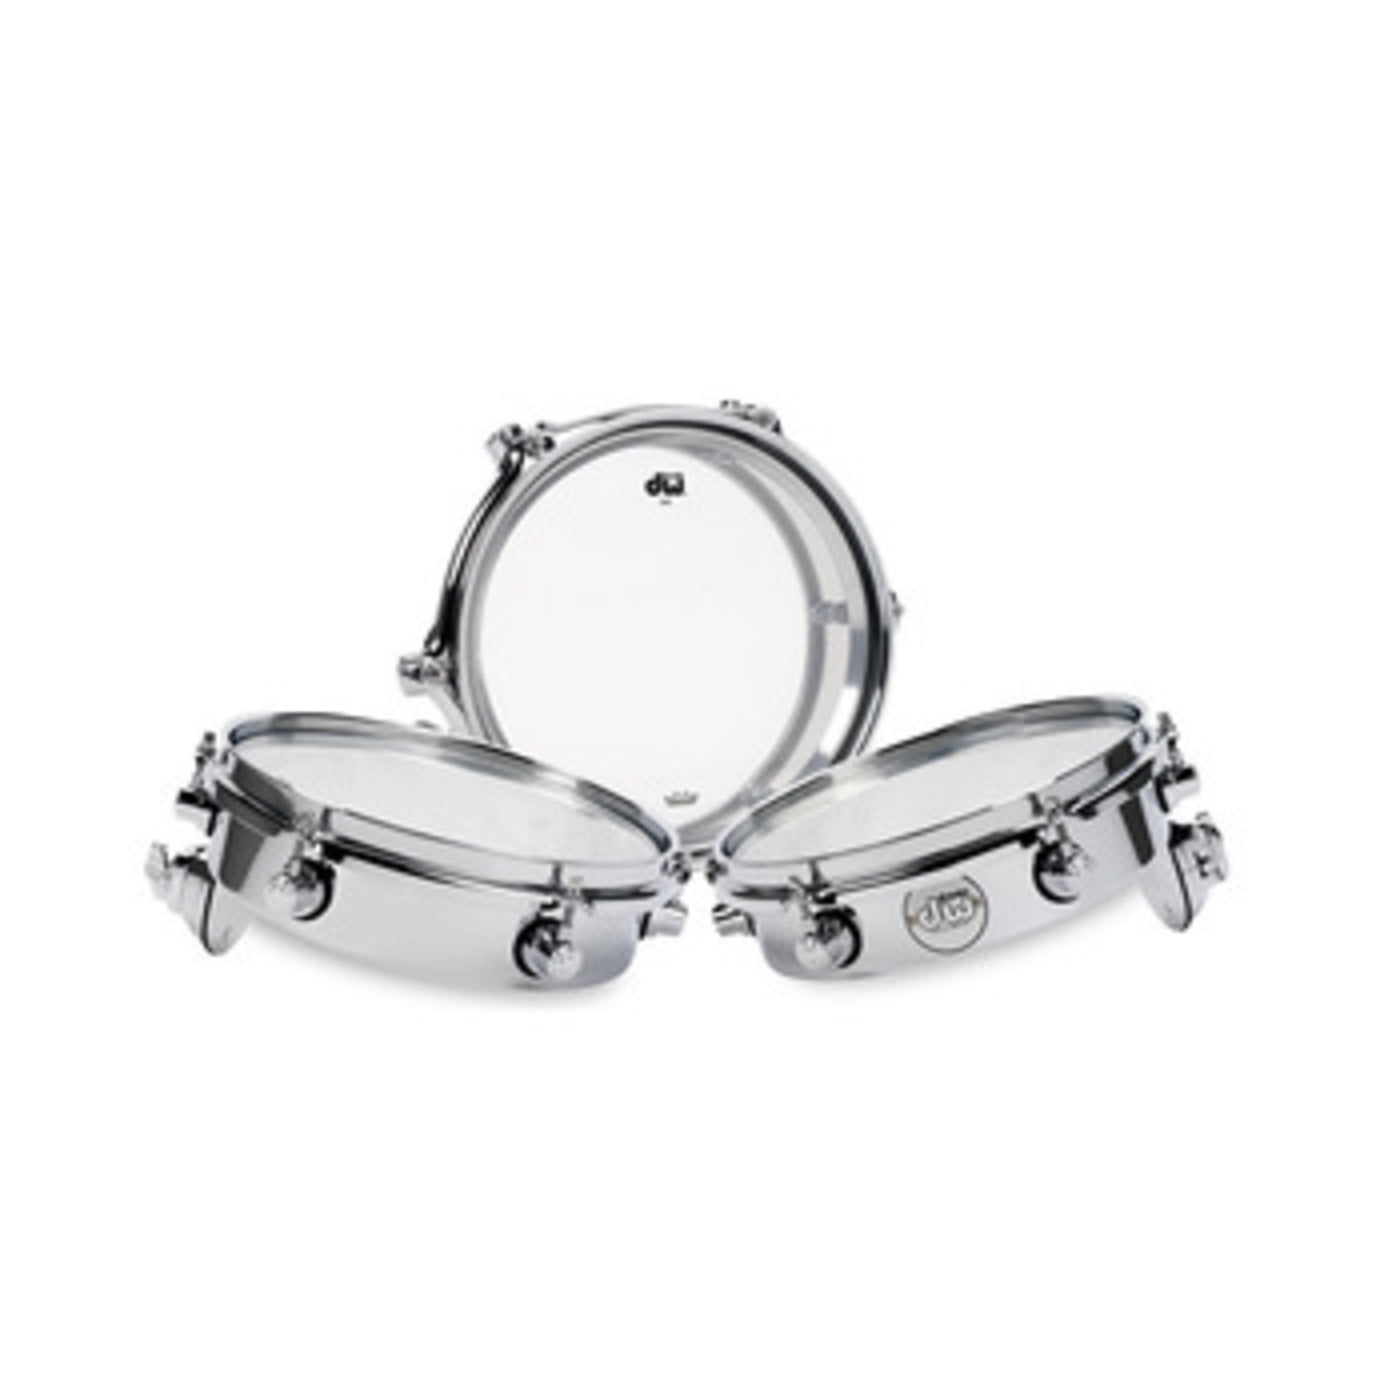 DW Design 2.5 x 8-inch Add-On Piccolo for Tom Tom Drum with TB12